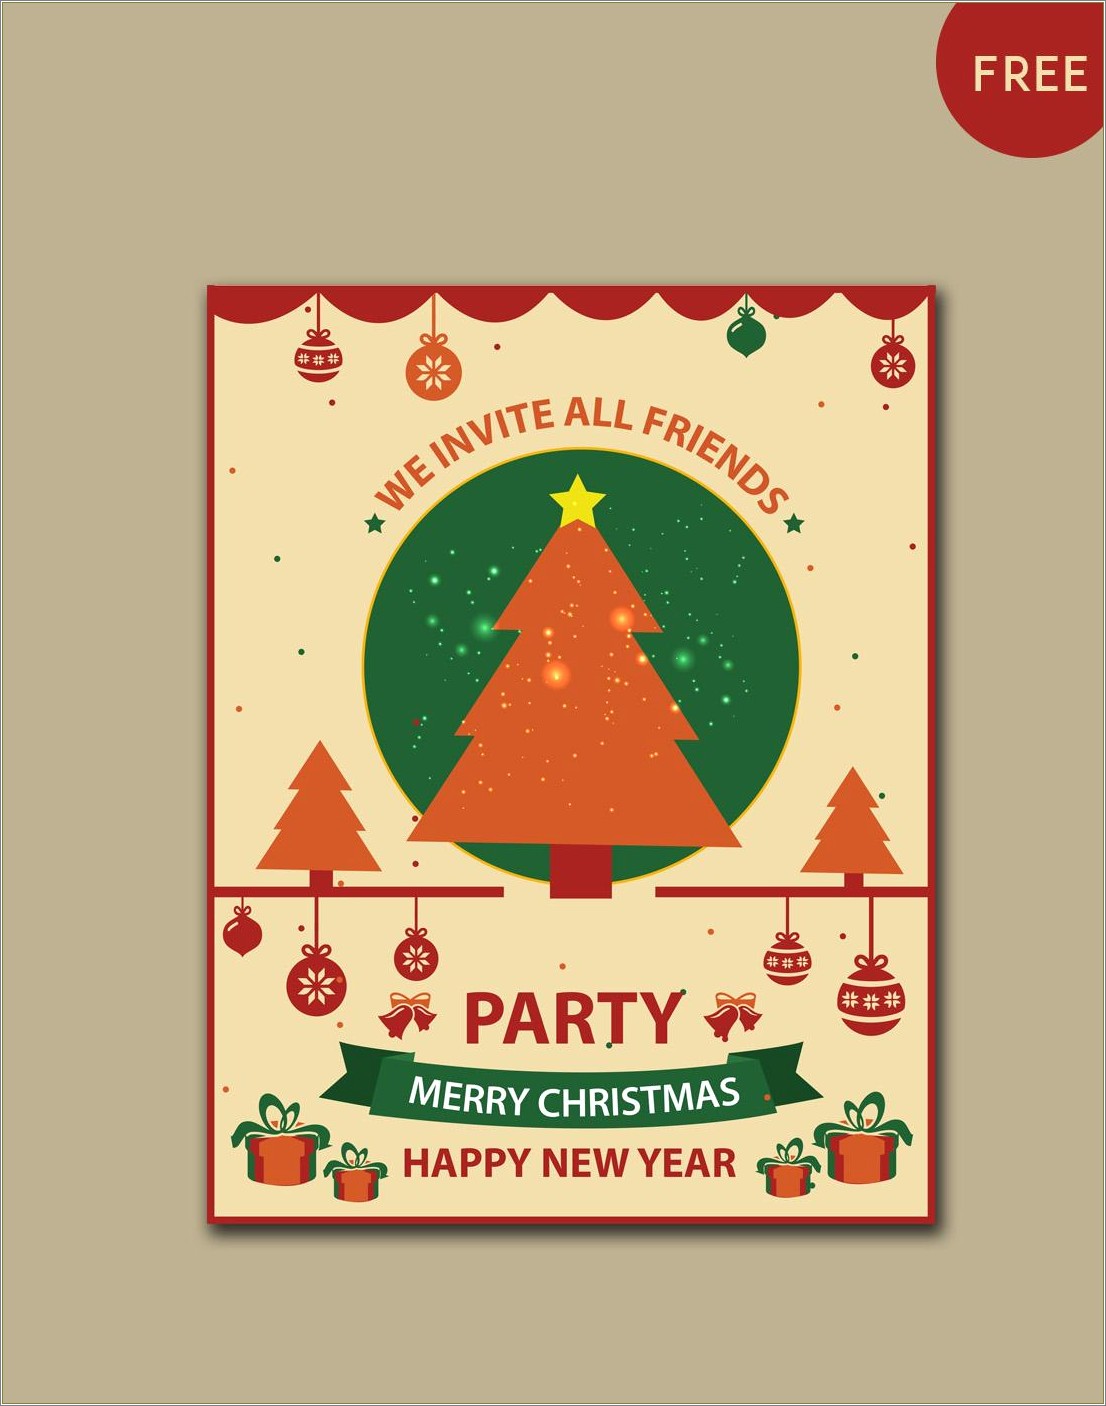 Free Christmas Party Invitation Template Download